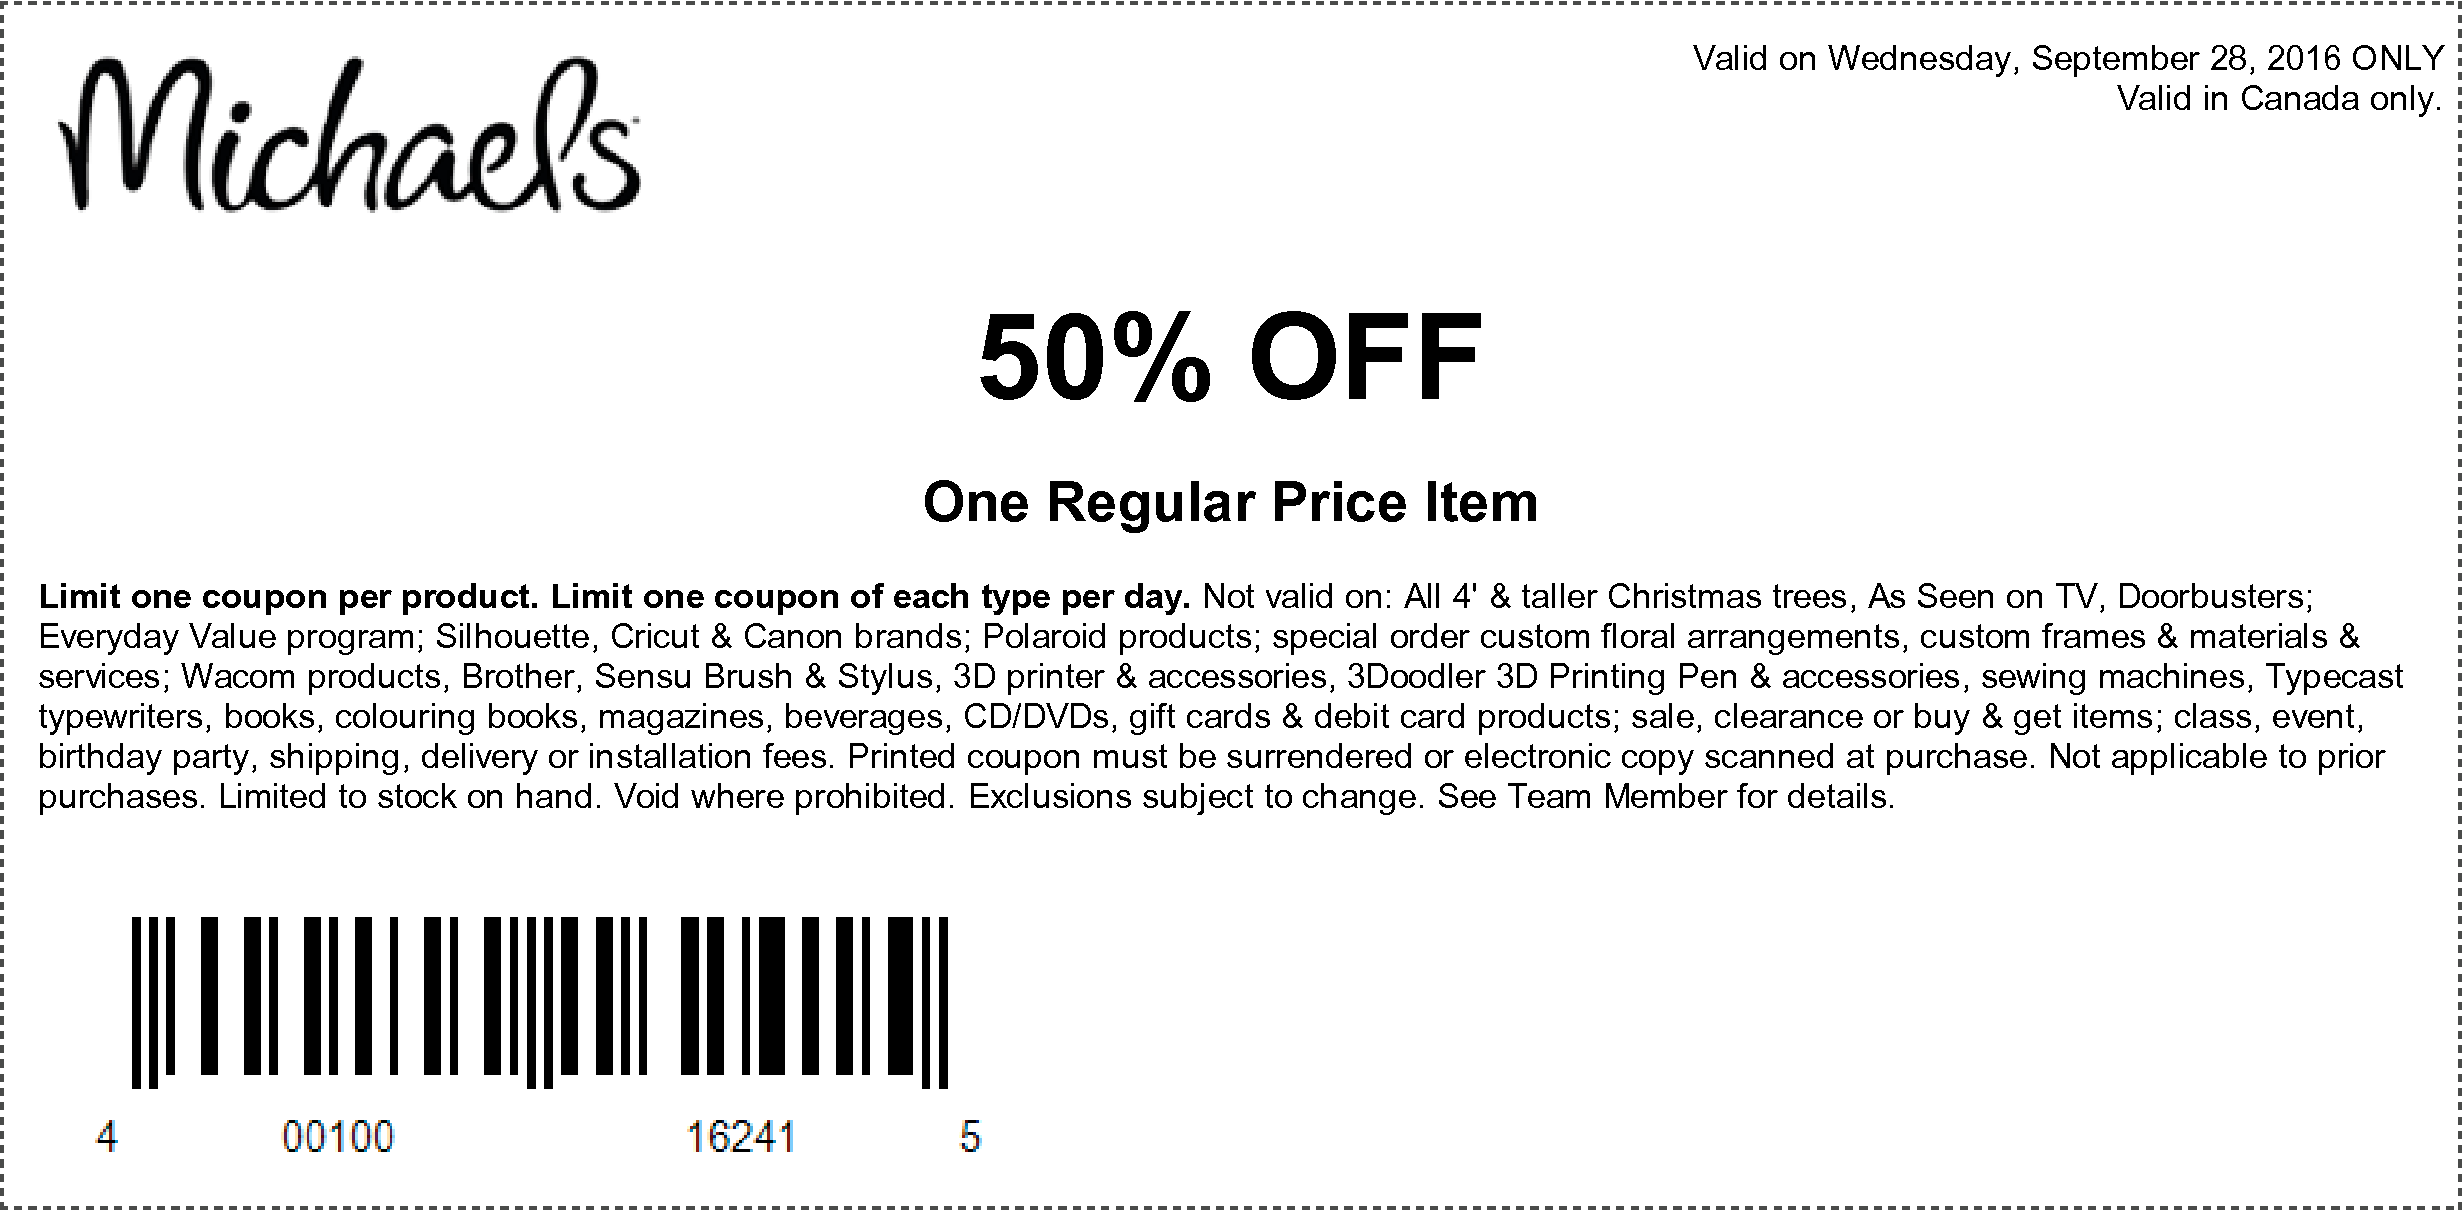 Michaels Coupon: Take 50% Off One Regular Price Item Today Only